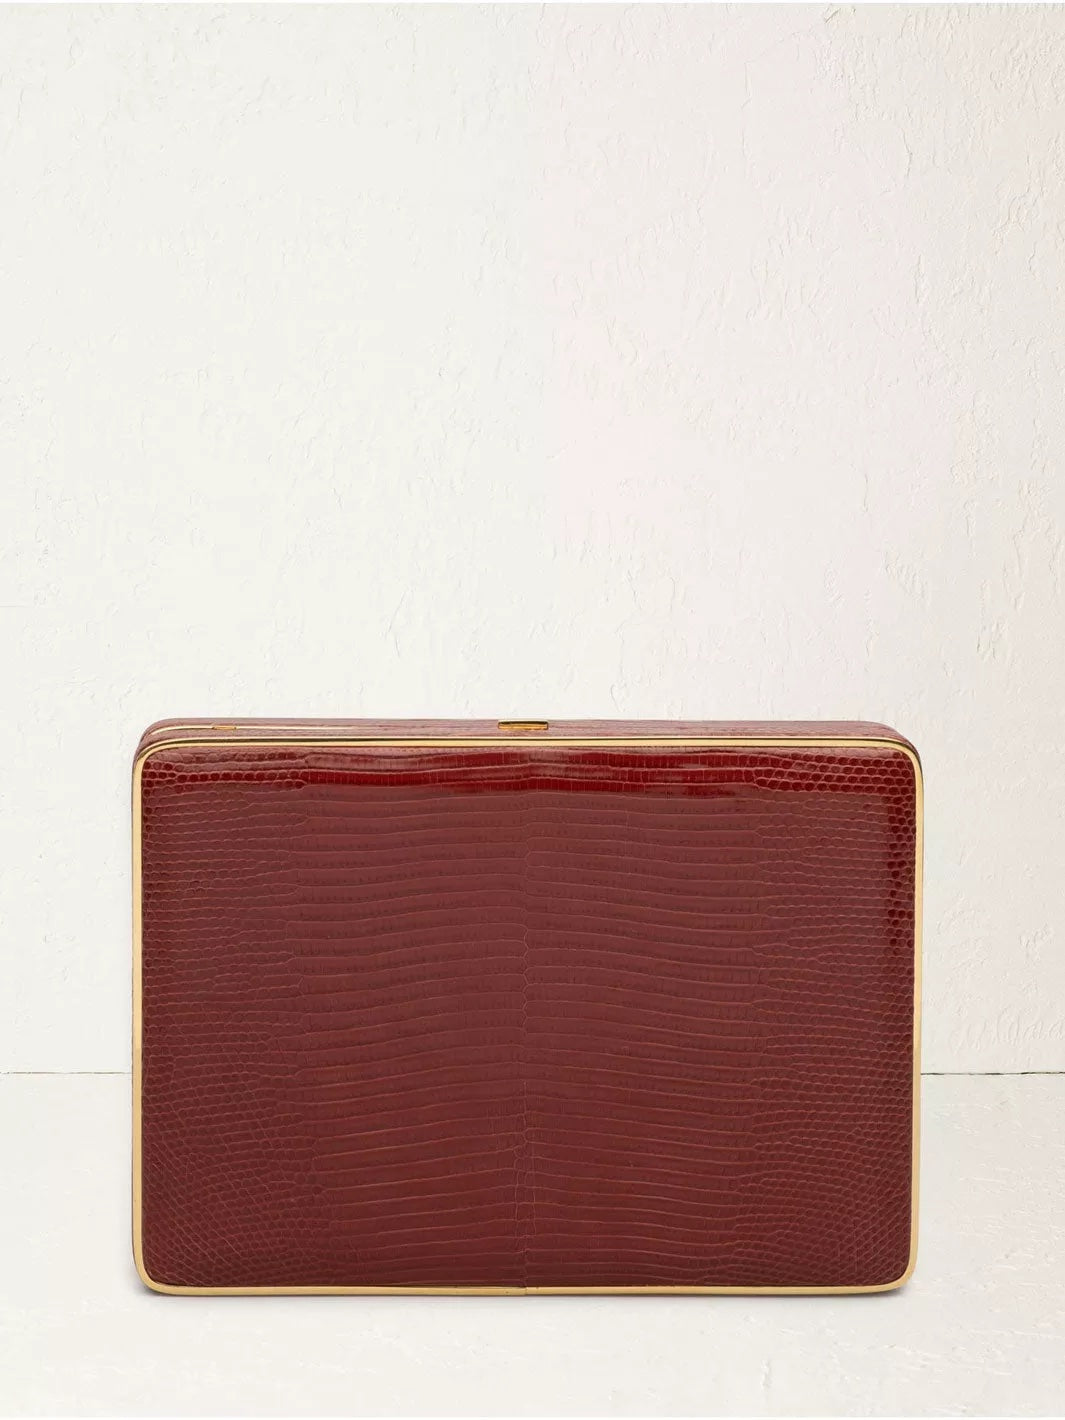 The Square Compact Case in Lizard - Chili Red